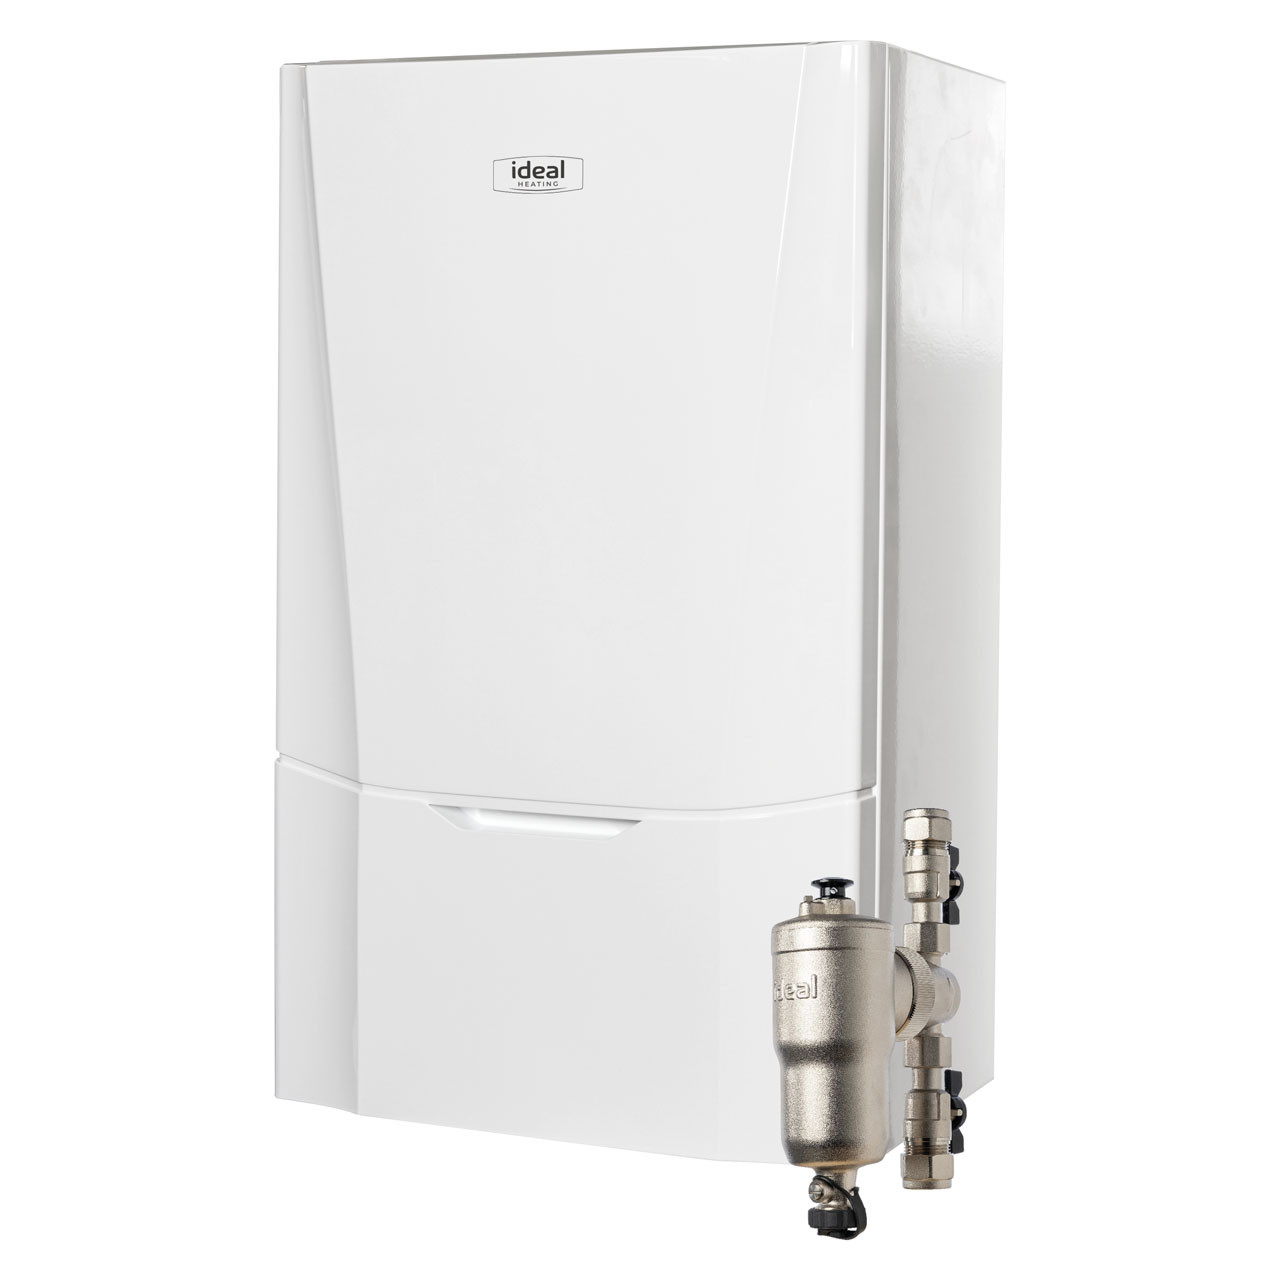 Photograph of Ideal Vogue Max 32 Kw Combi Boiler 218857